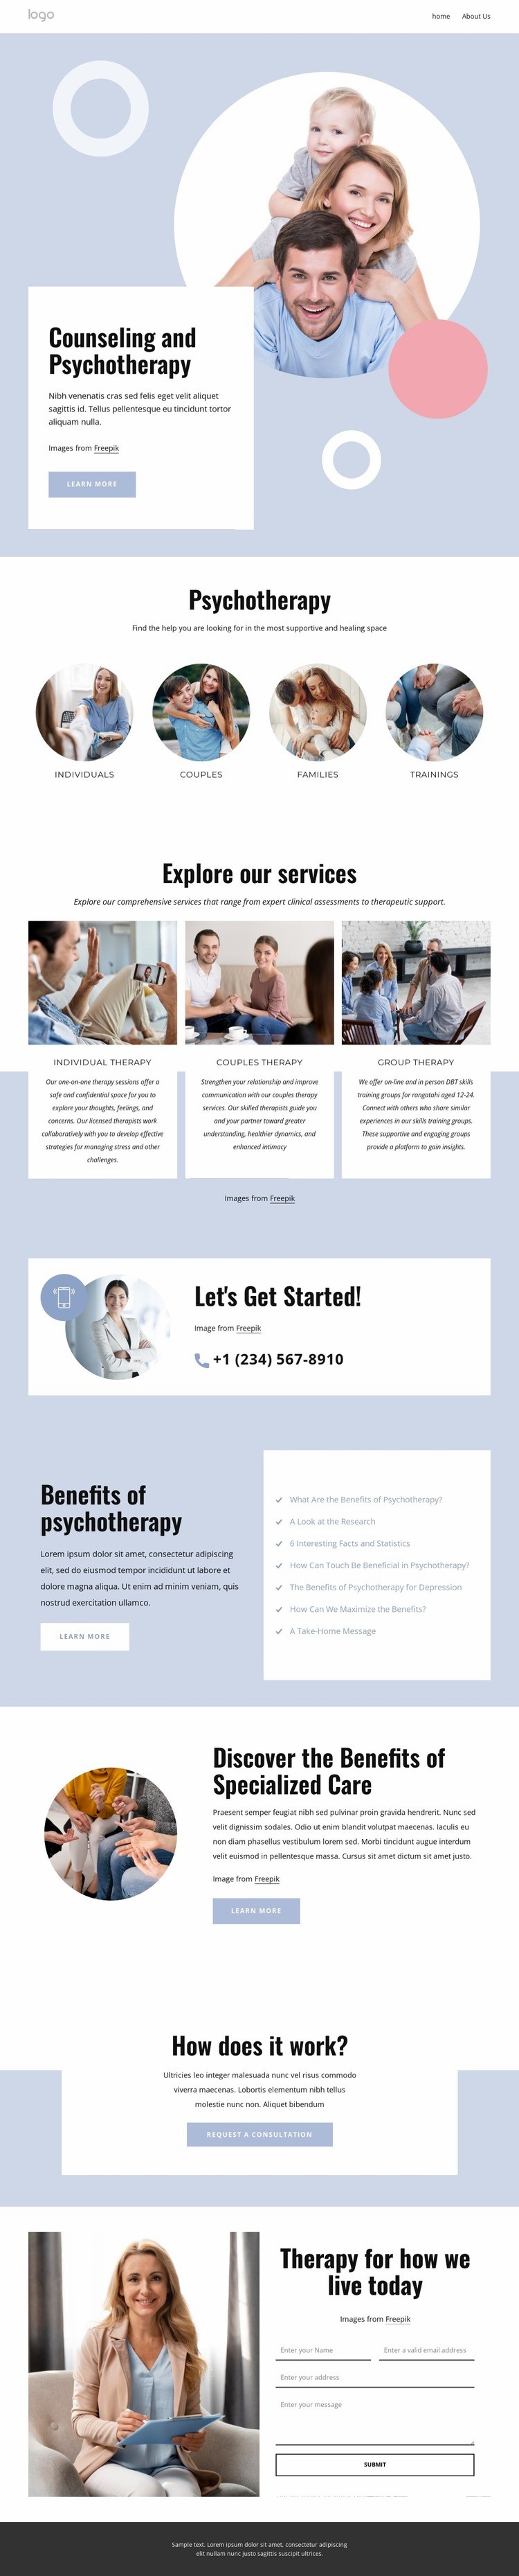 Counseling and psychotherapy Homepage Design